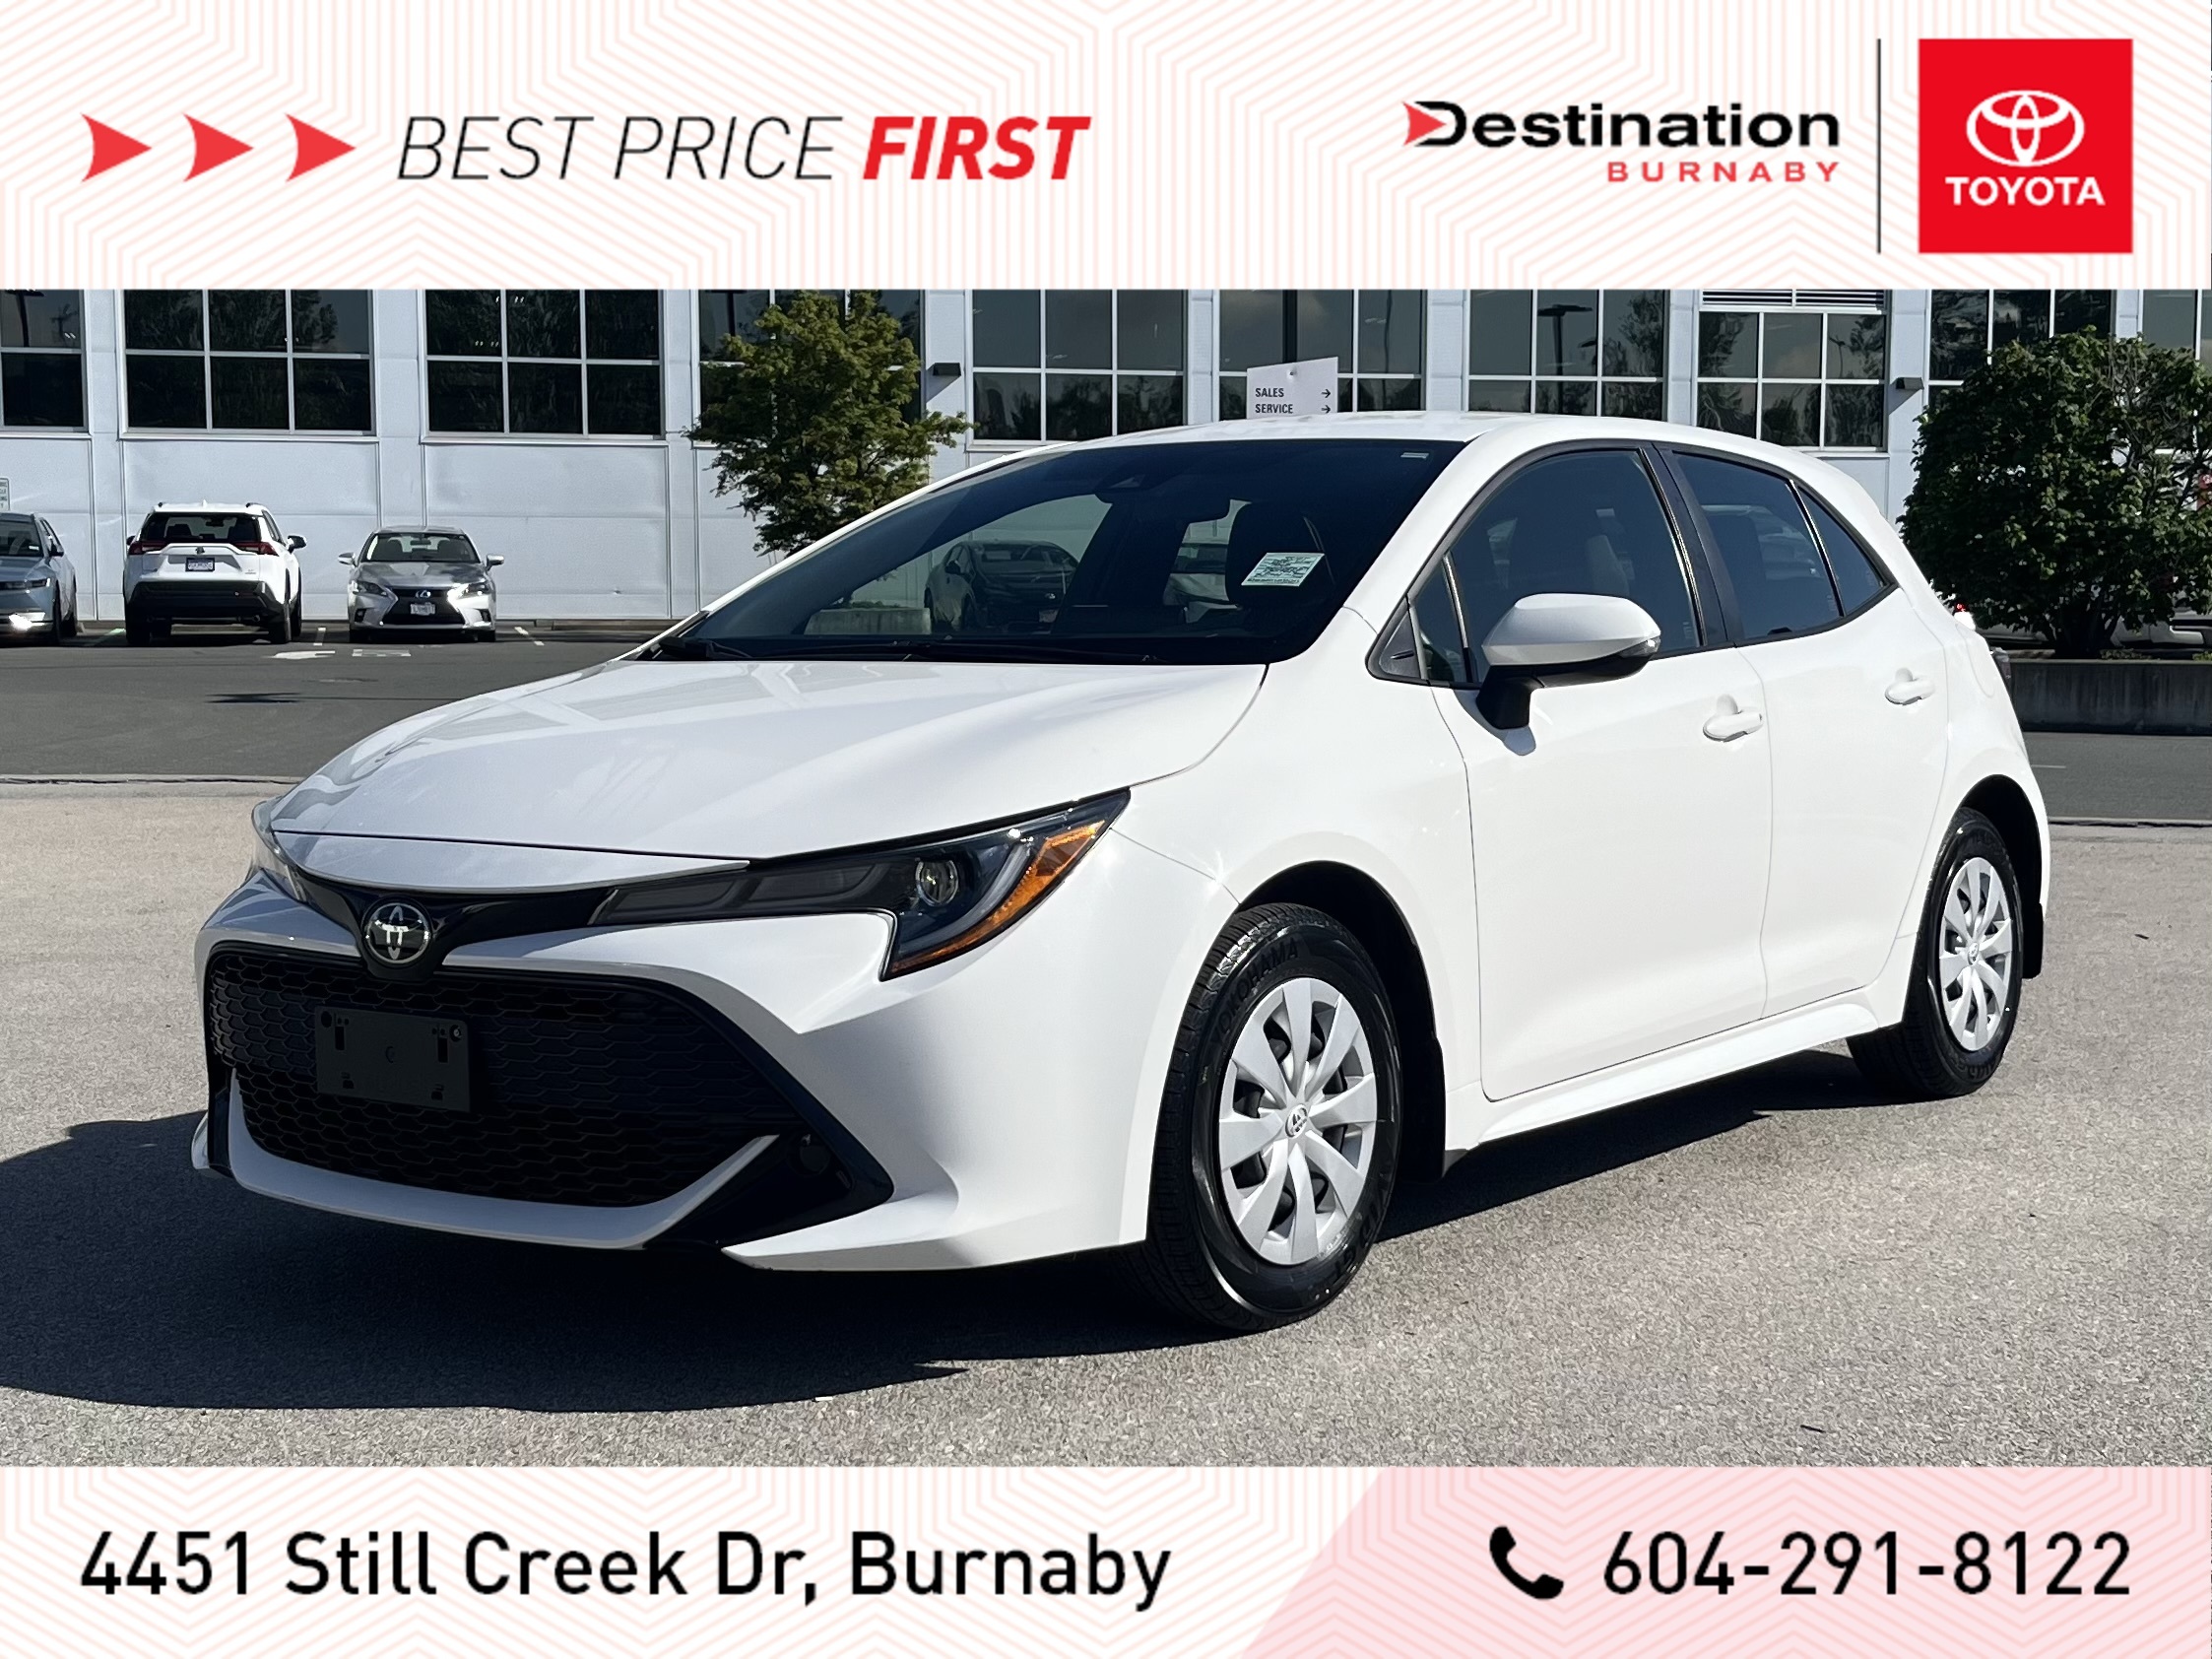 2019 Toyota Corolla Hatch 6-speed, Low Kms, No accidents